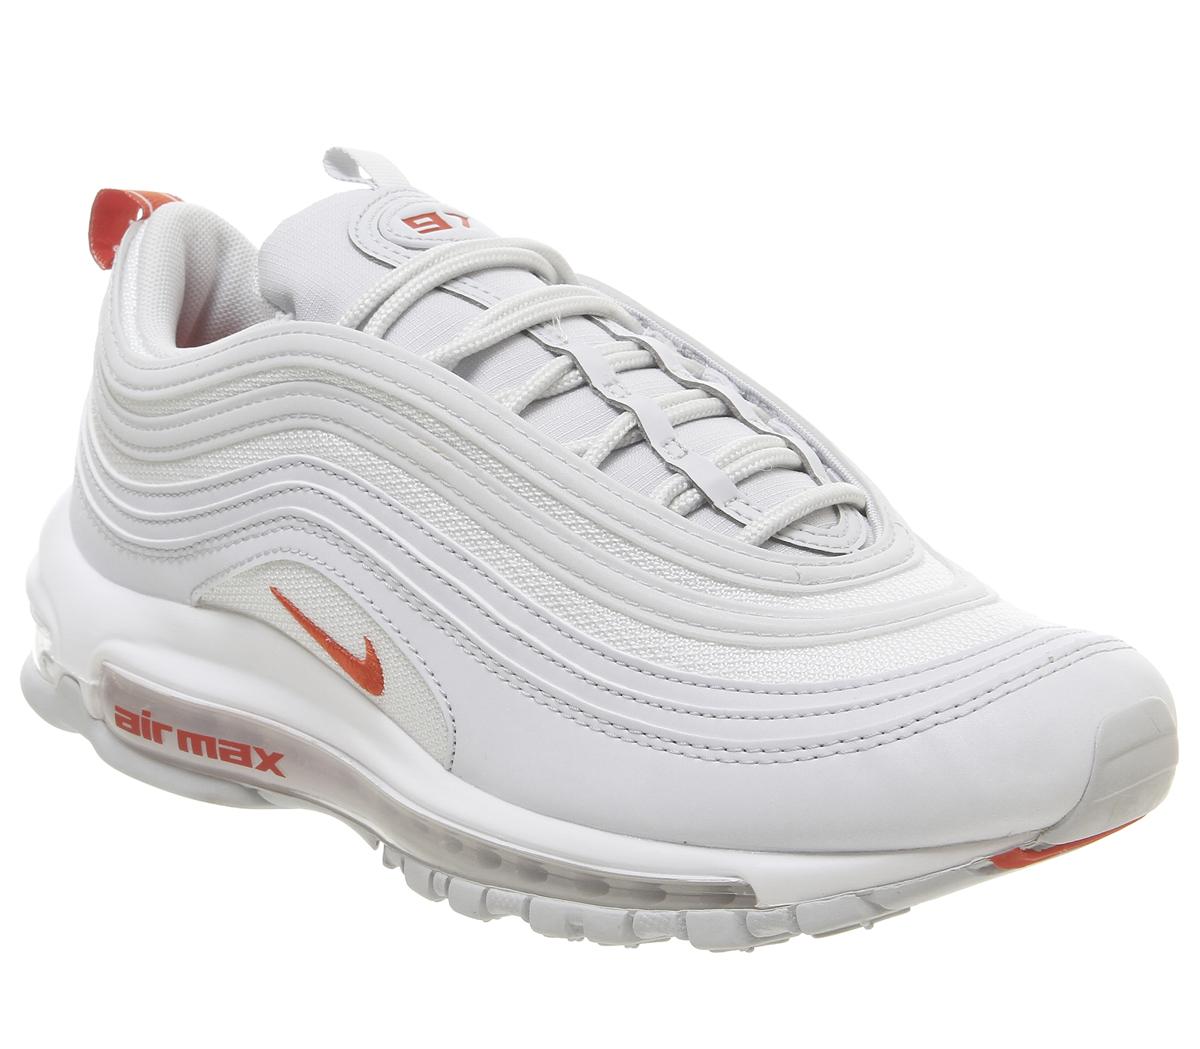 white 97 trainers